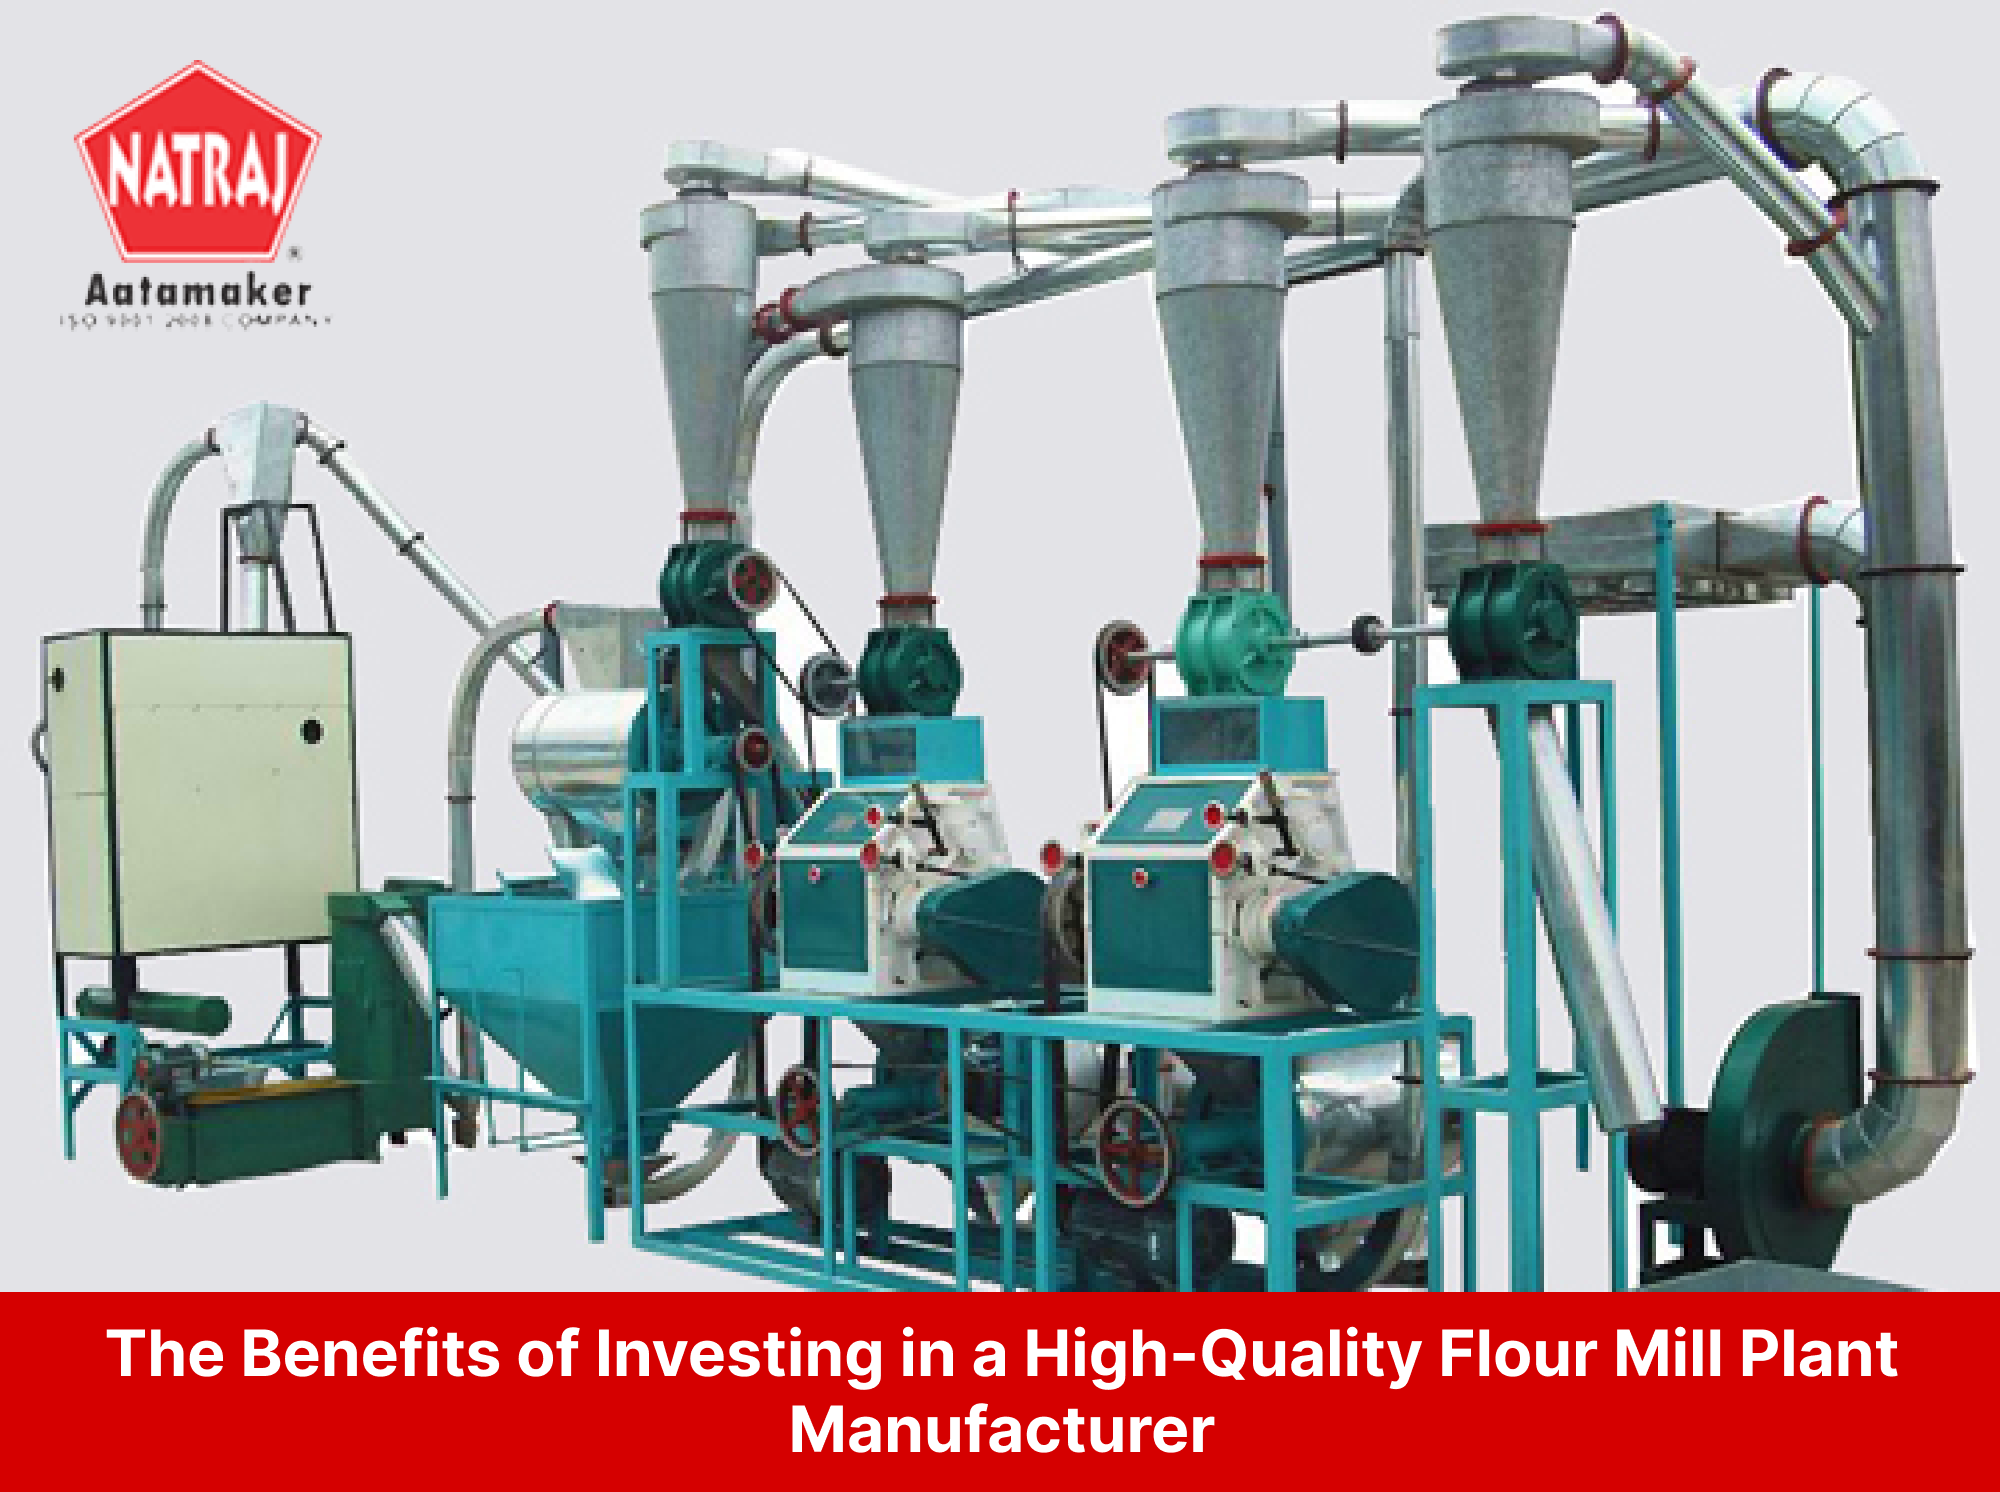 The Benefits of Investing in a High-Quality Flour Mill Plant Manufacturer 